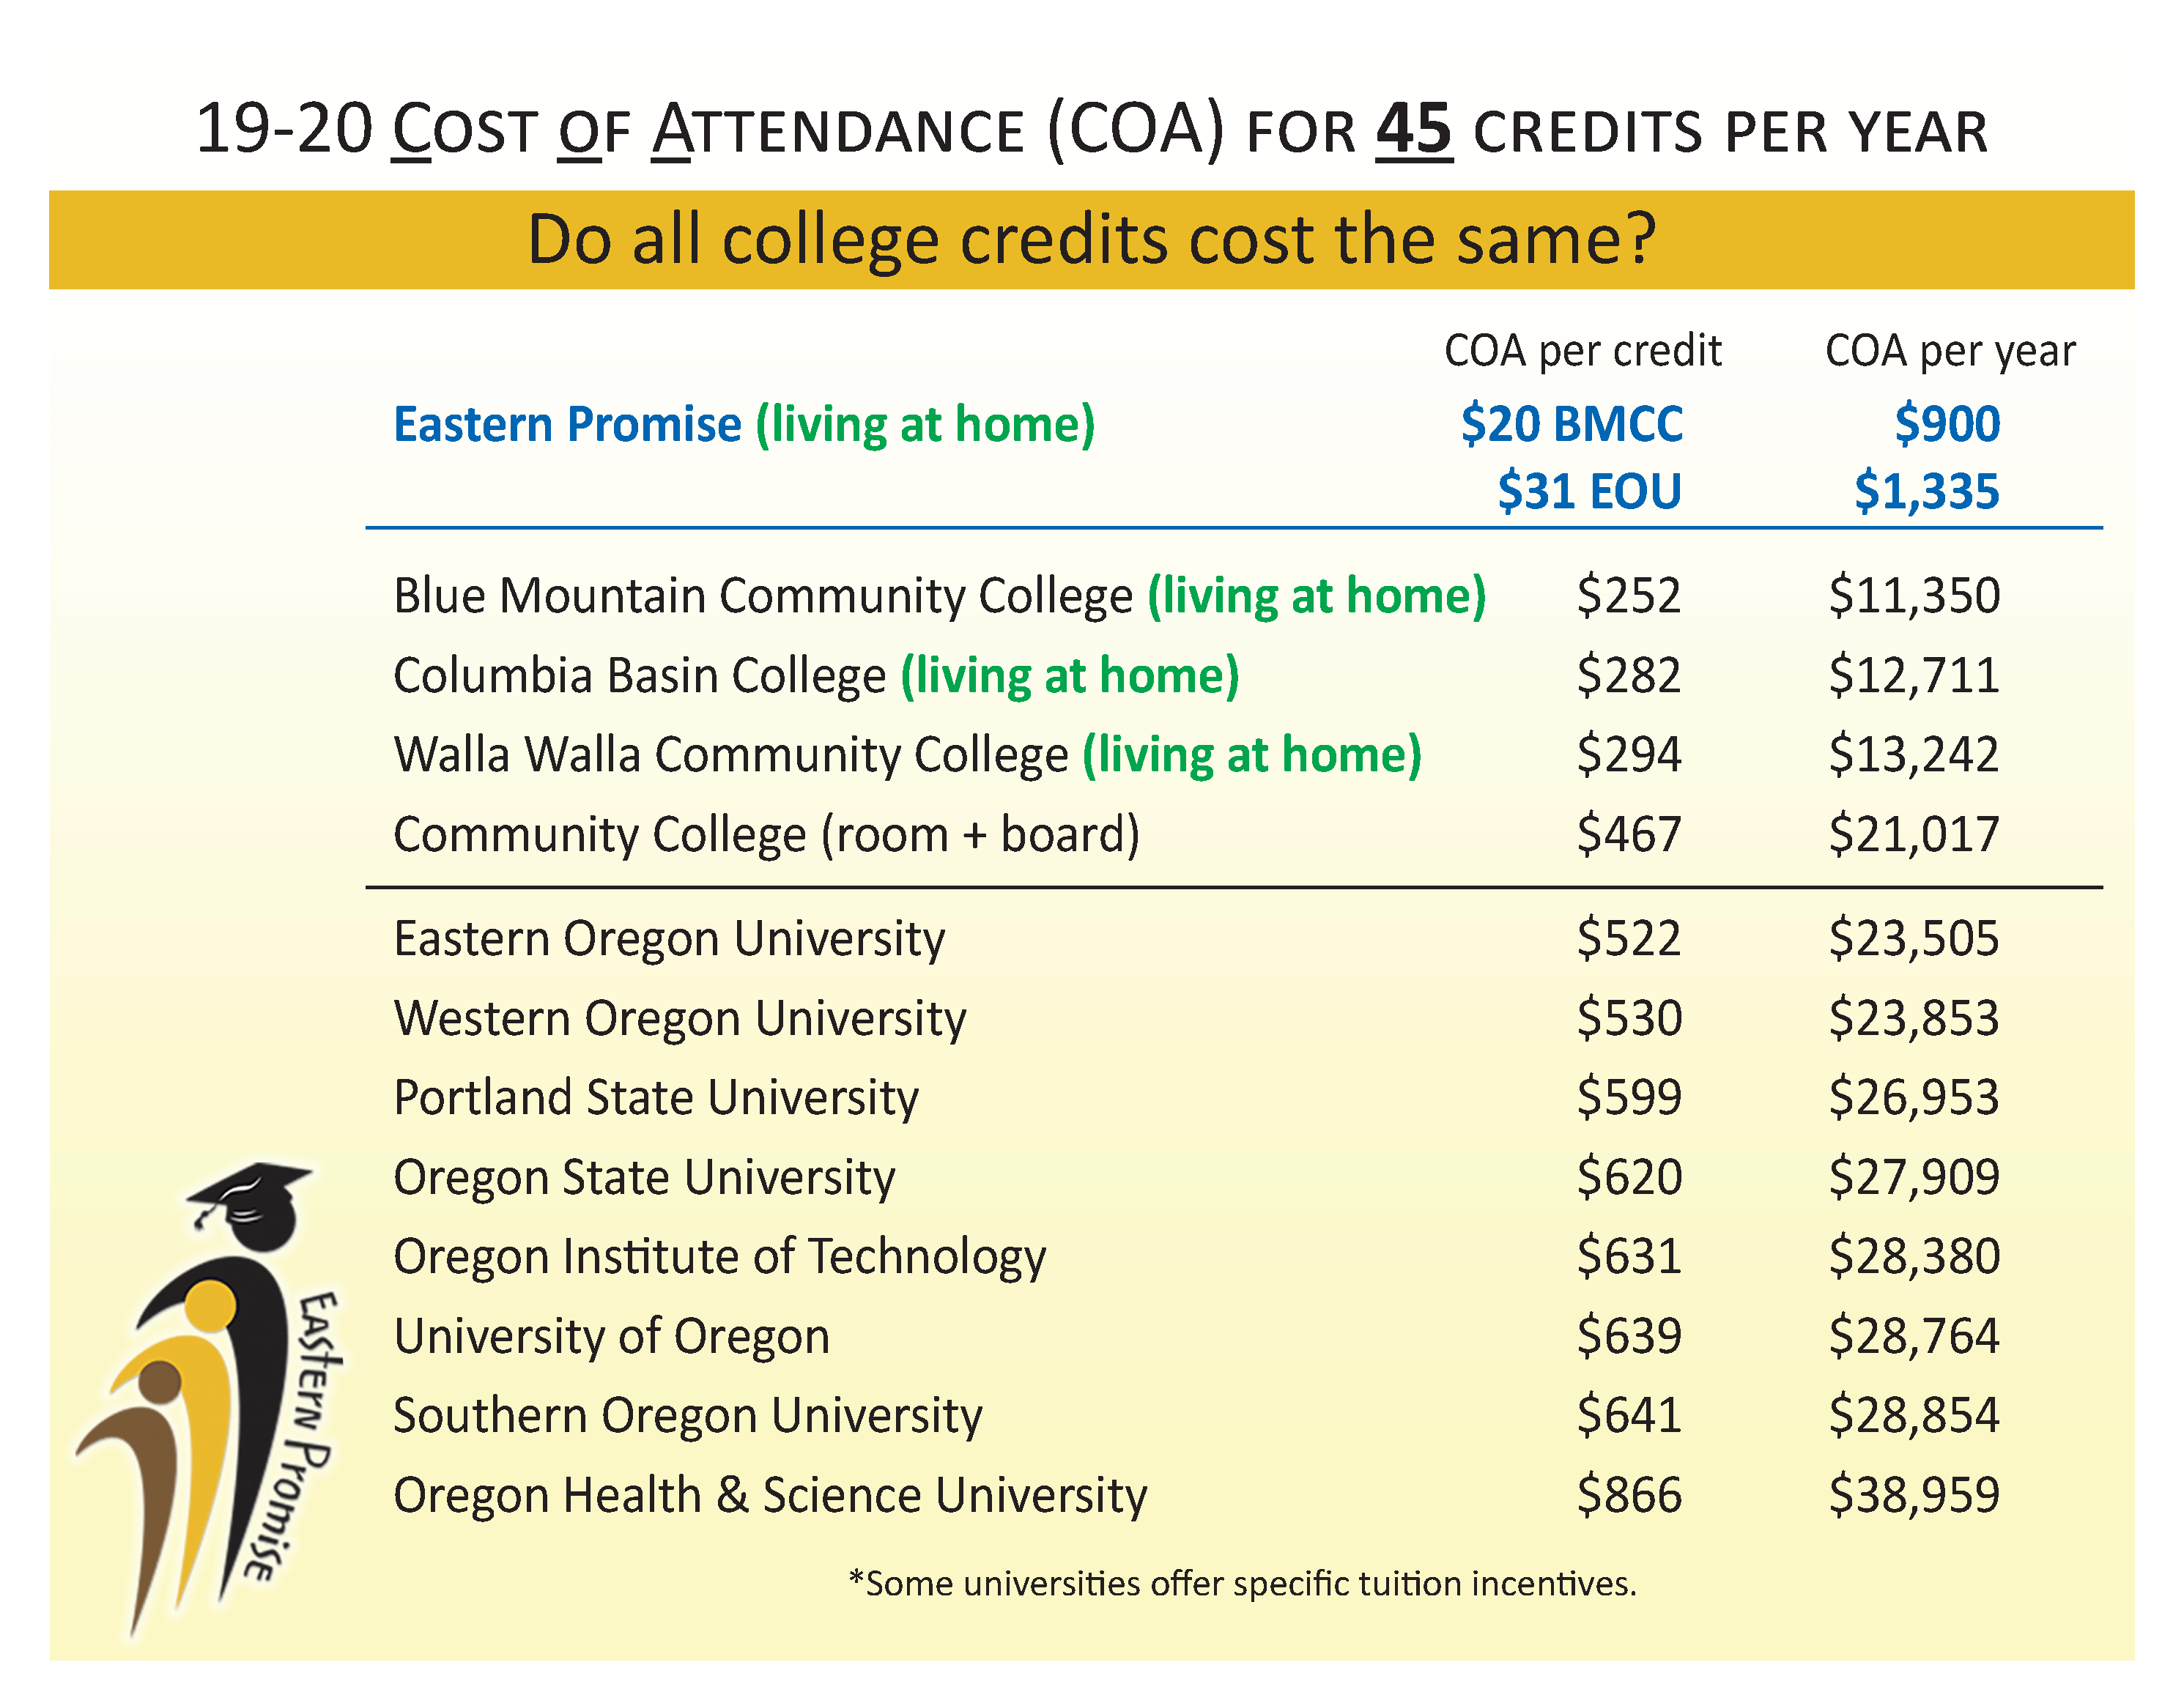 19-20 COST OF ATTENDANCE (COA) FOR 45 CREDITS PER YEAR